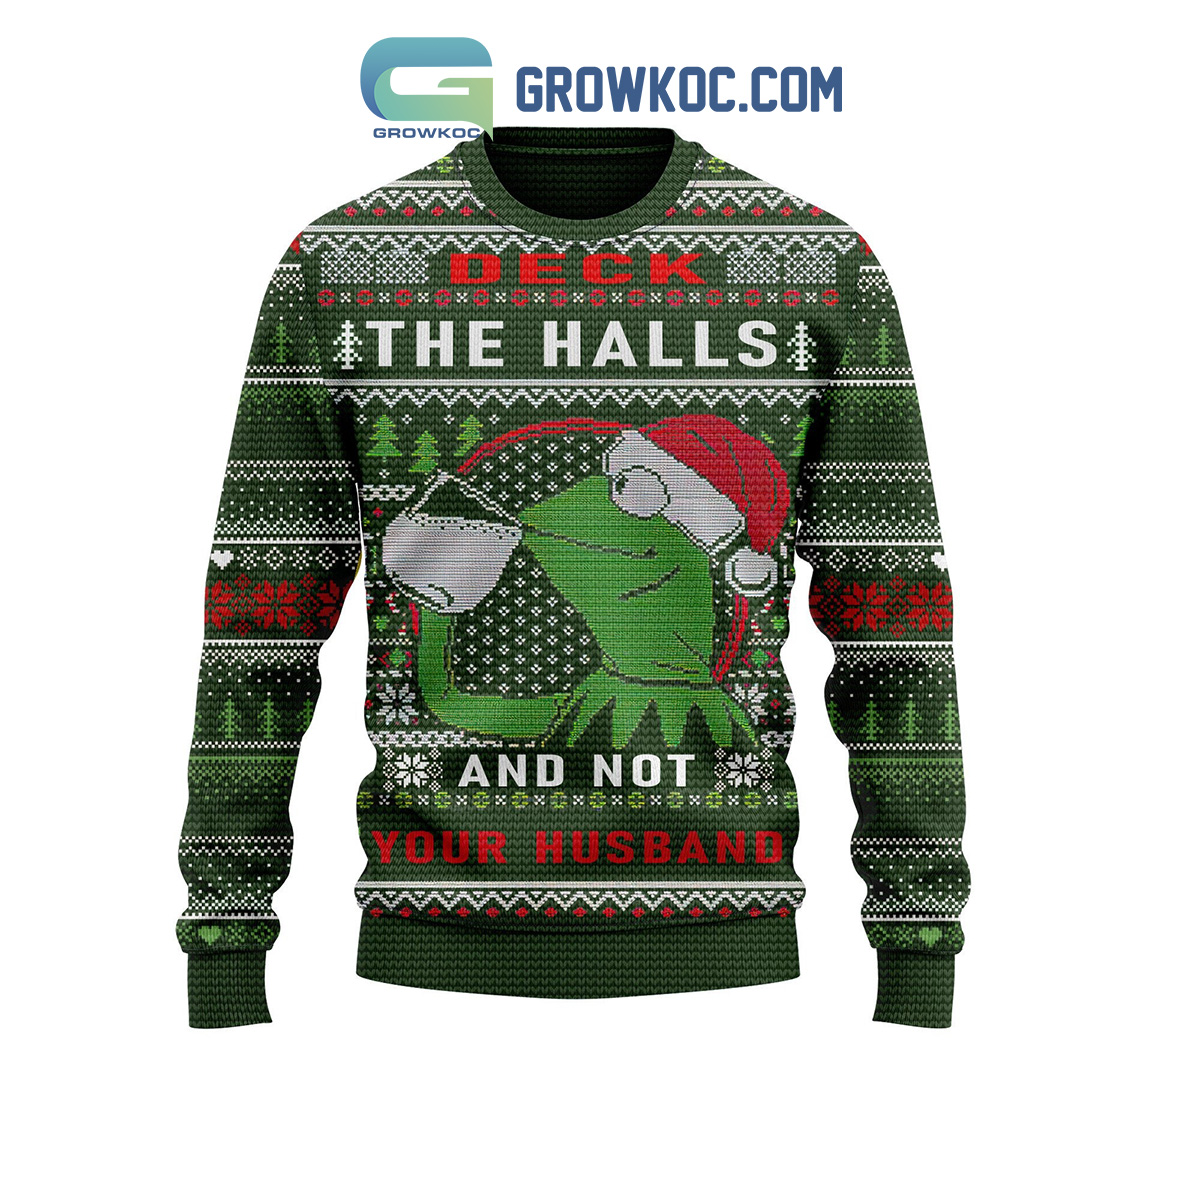 The Muppets Deck The Halls And Not Your Husband Christmas Ugly Sweater